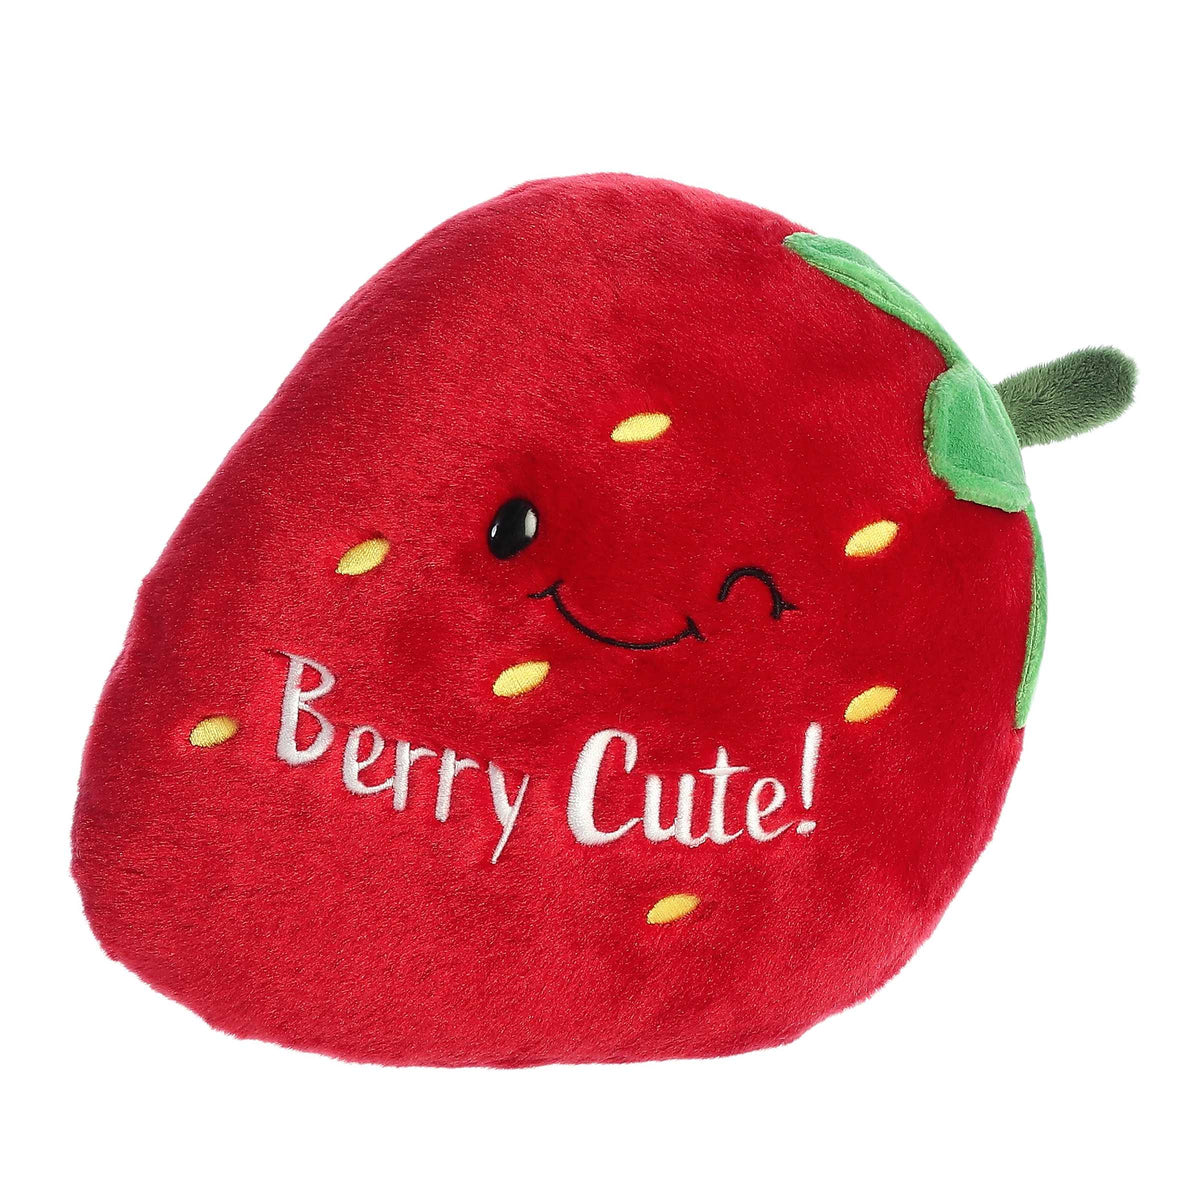 Huggable strawberry plush with red body, yellow and green detailing, "Berry Cute!" pun written across and a wink expression